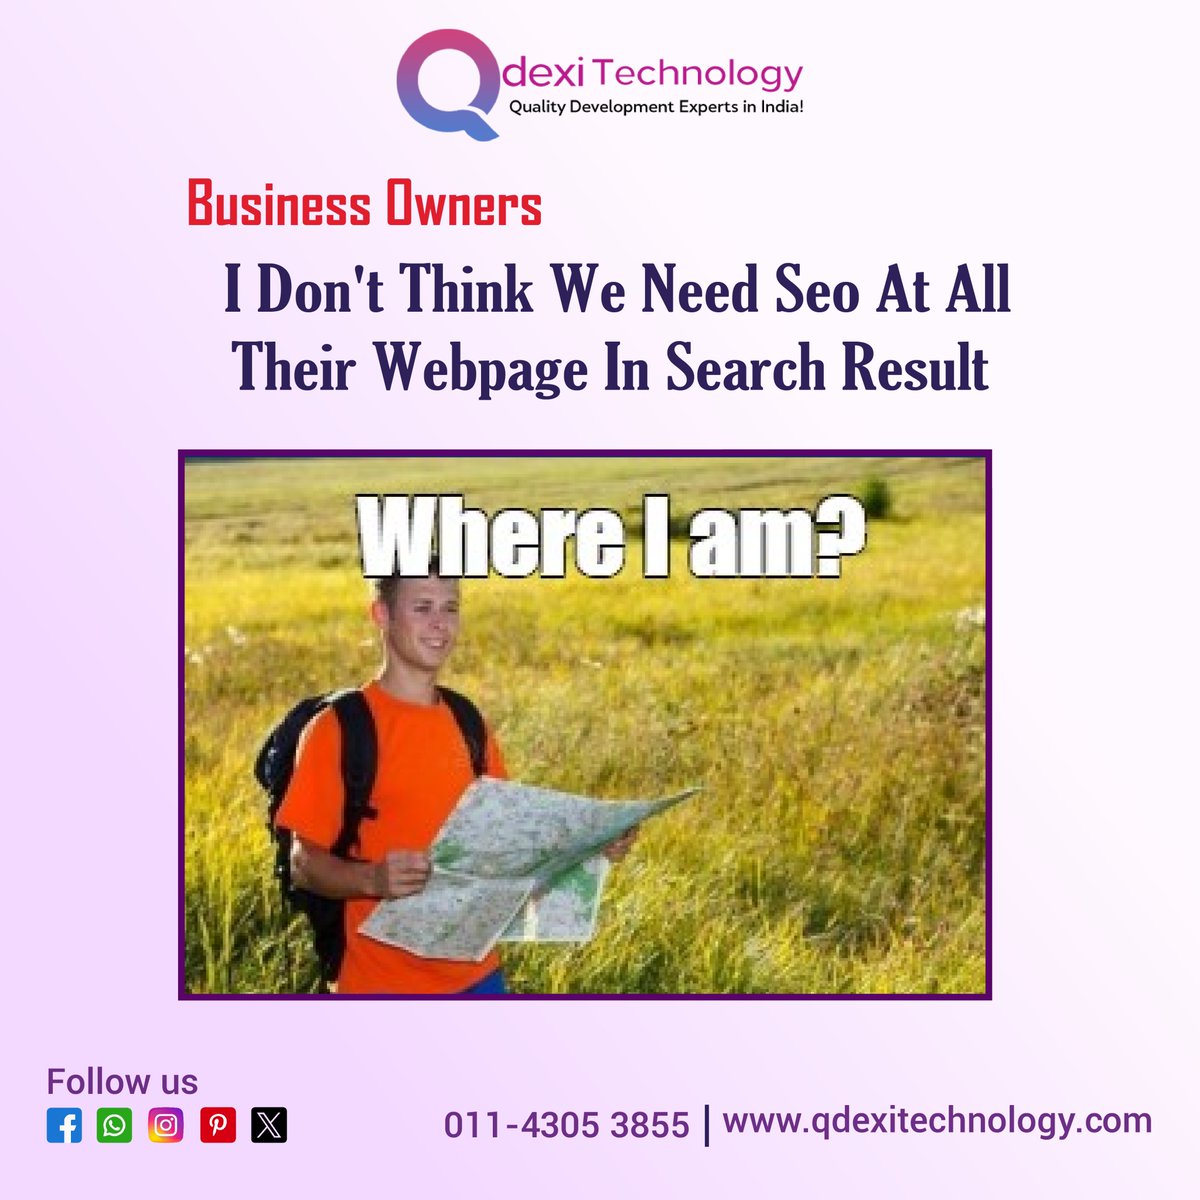 Indian quality development experts help business owners improve their webpage's search result placement with SEO.

#QualityDevelopmentExpertsIndia #BusinessOwnersIndia #SEOStrategyIndia #SearchResultPlacementIndia